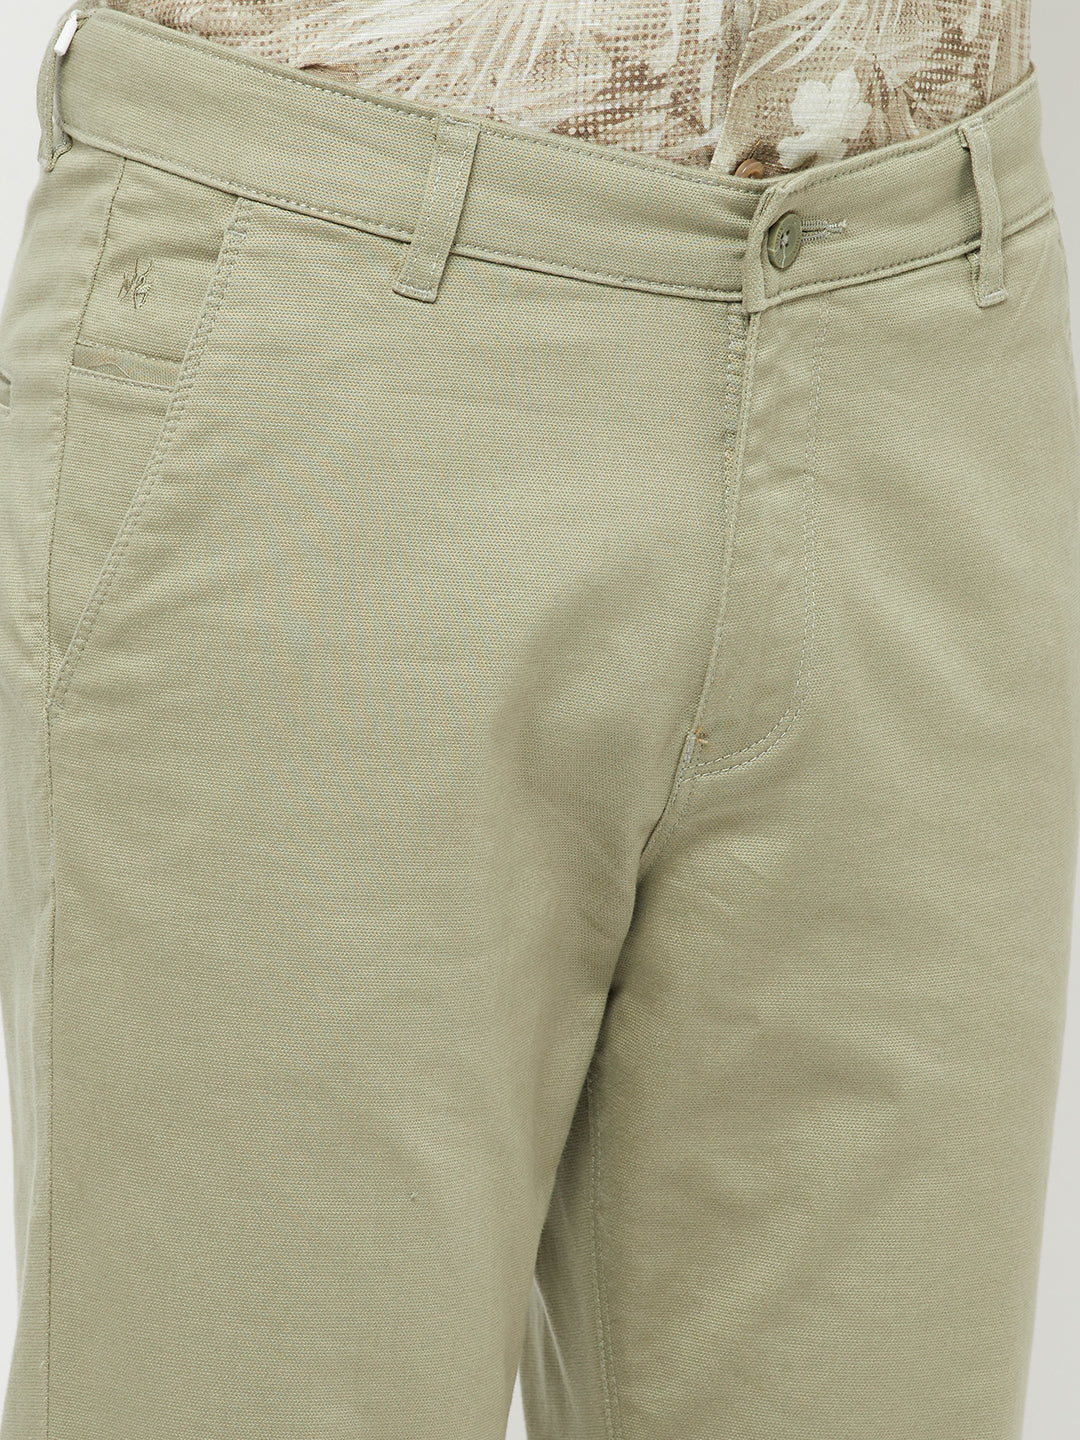 Olive Casual Trousers - Men Trousers